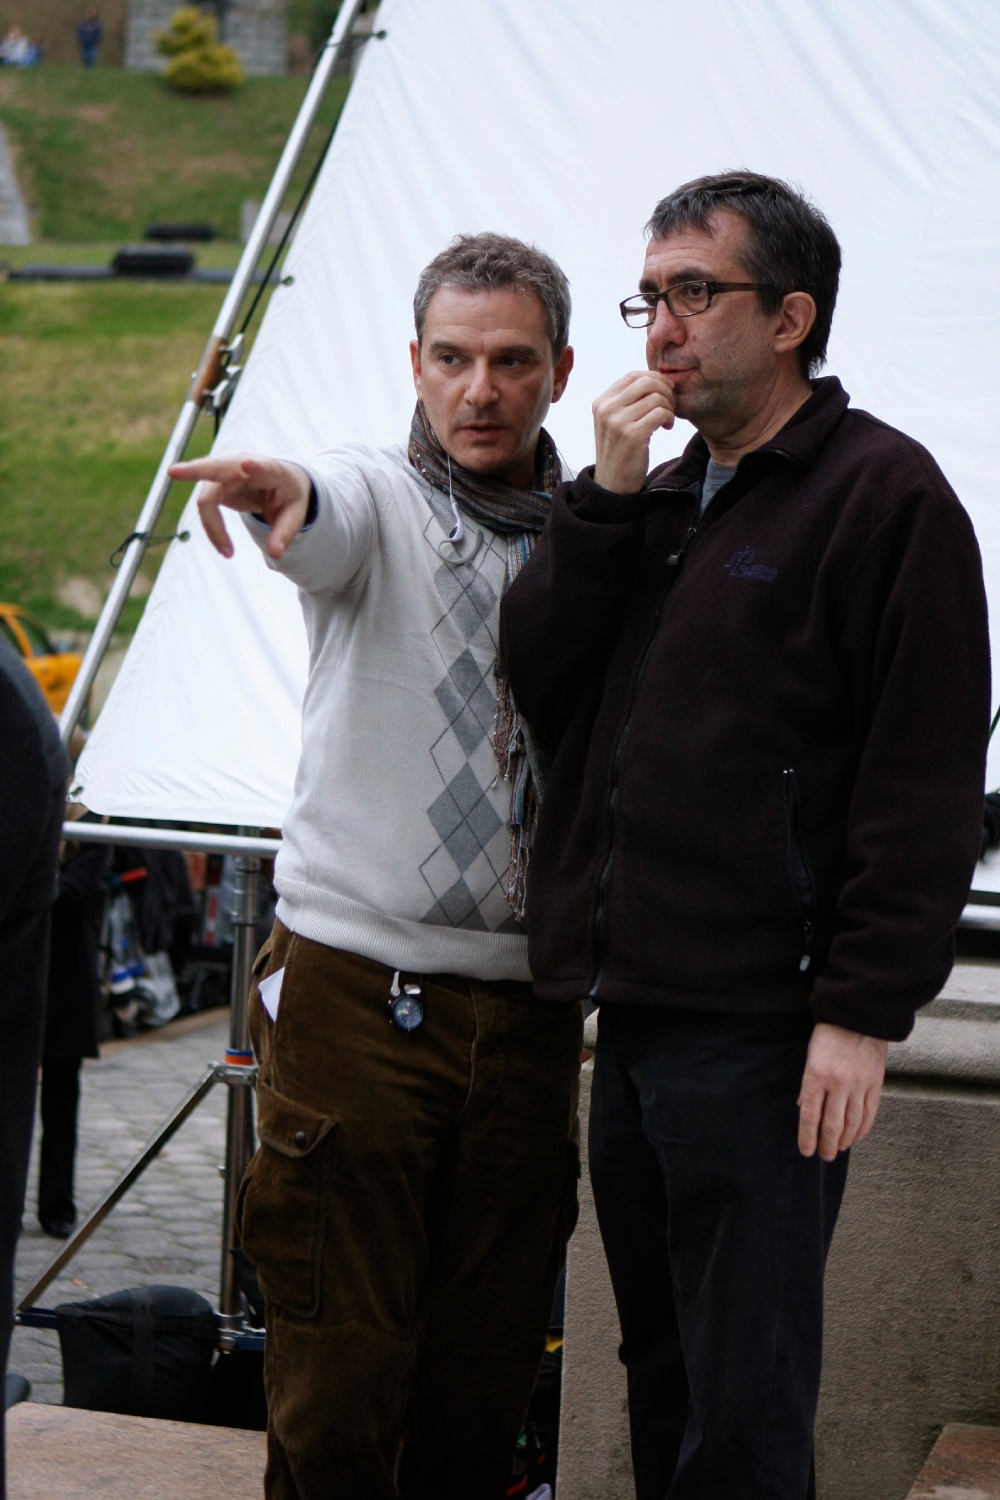 Directing Gossip Girl. Also pictured: Ron Fortunato, DP.